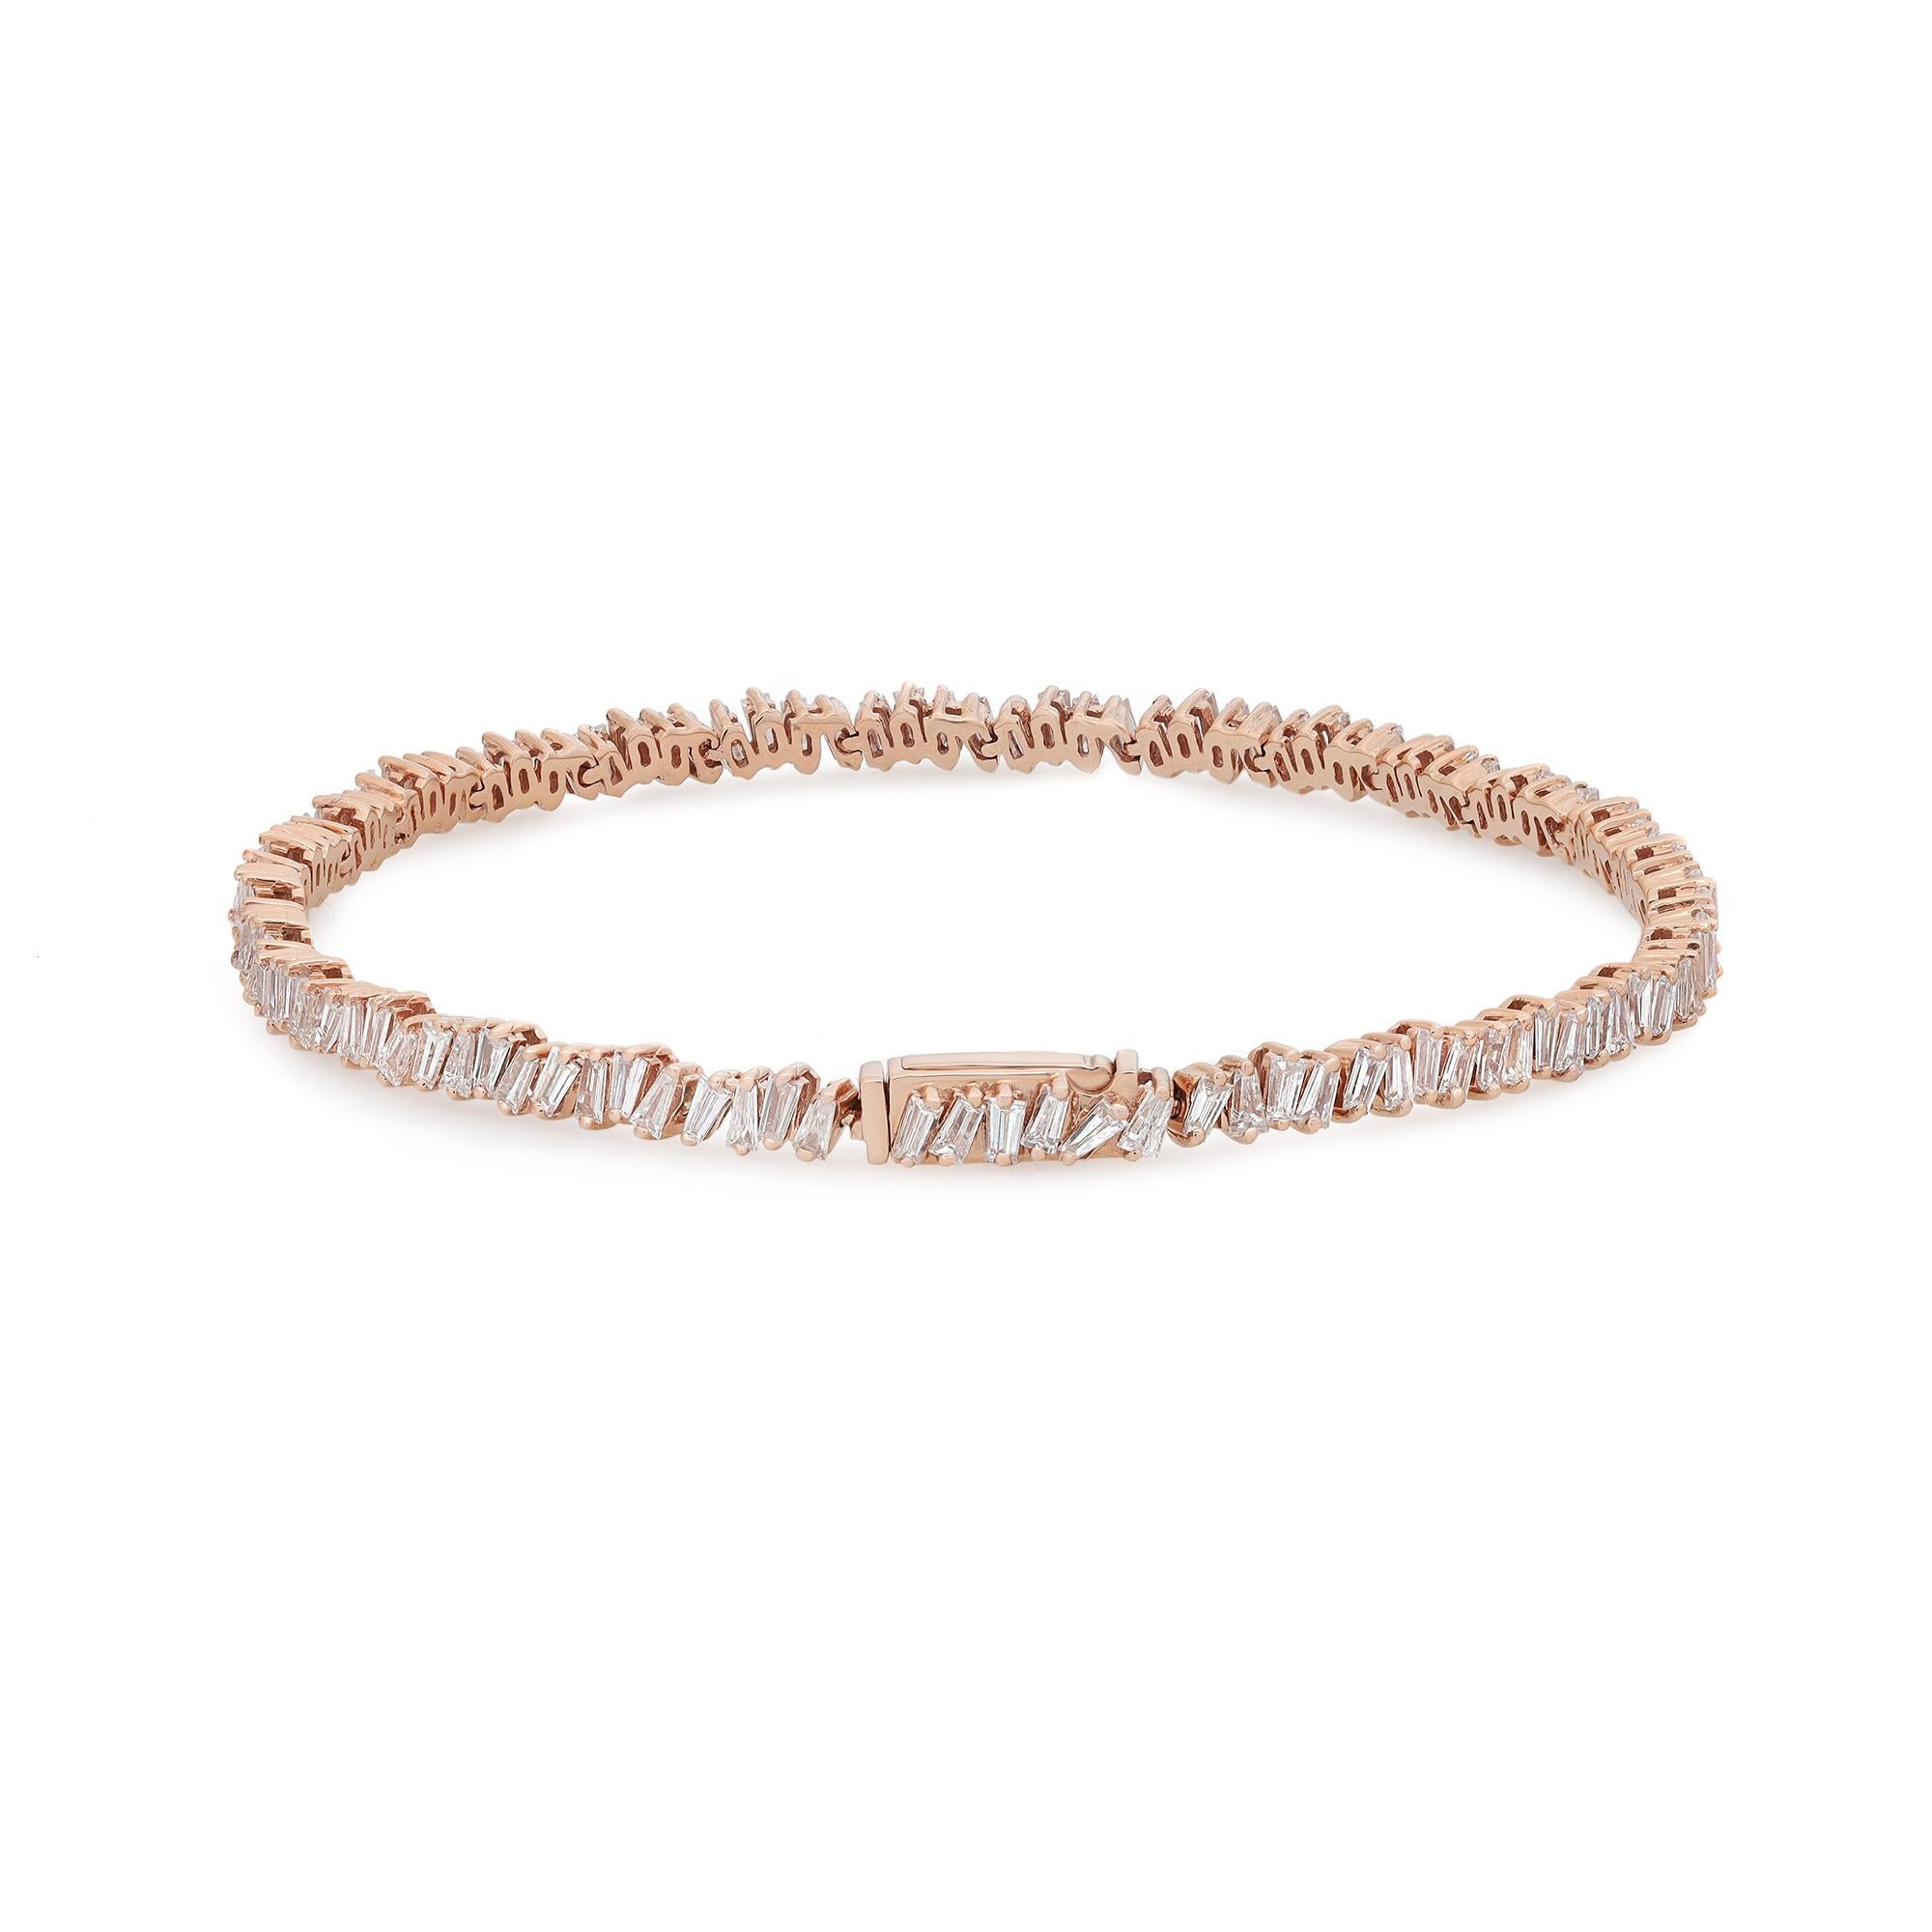 This beautifully crafted Rachael Koen timeless beauty tennis bracelet features Baguettes cut natural diamonds set in prong setting. Crafted in 18k rose gold. This truly gorgeous handmade modern creation is a great addition to your jewelry